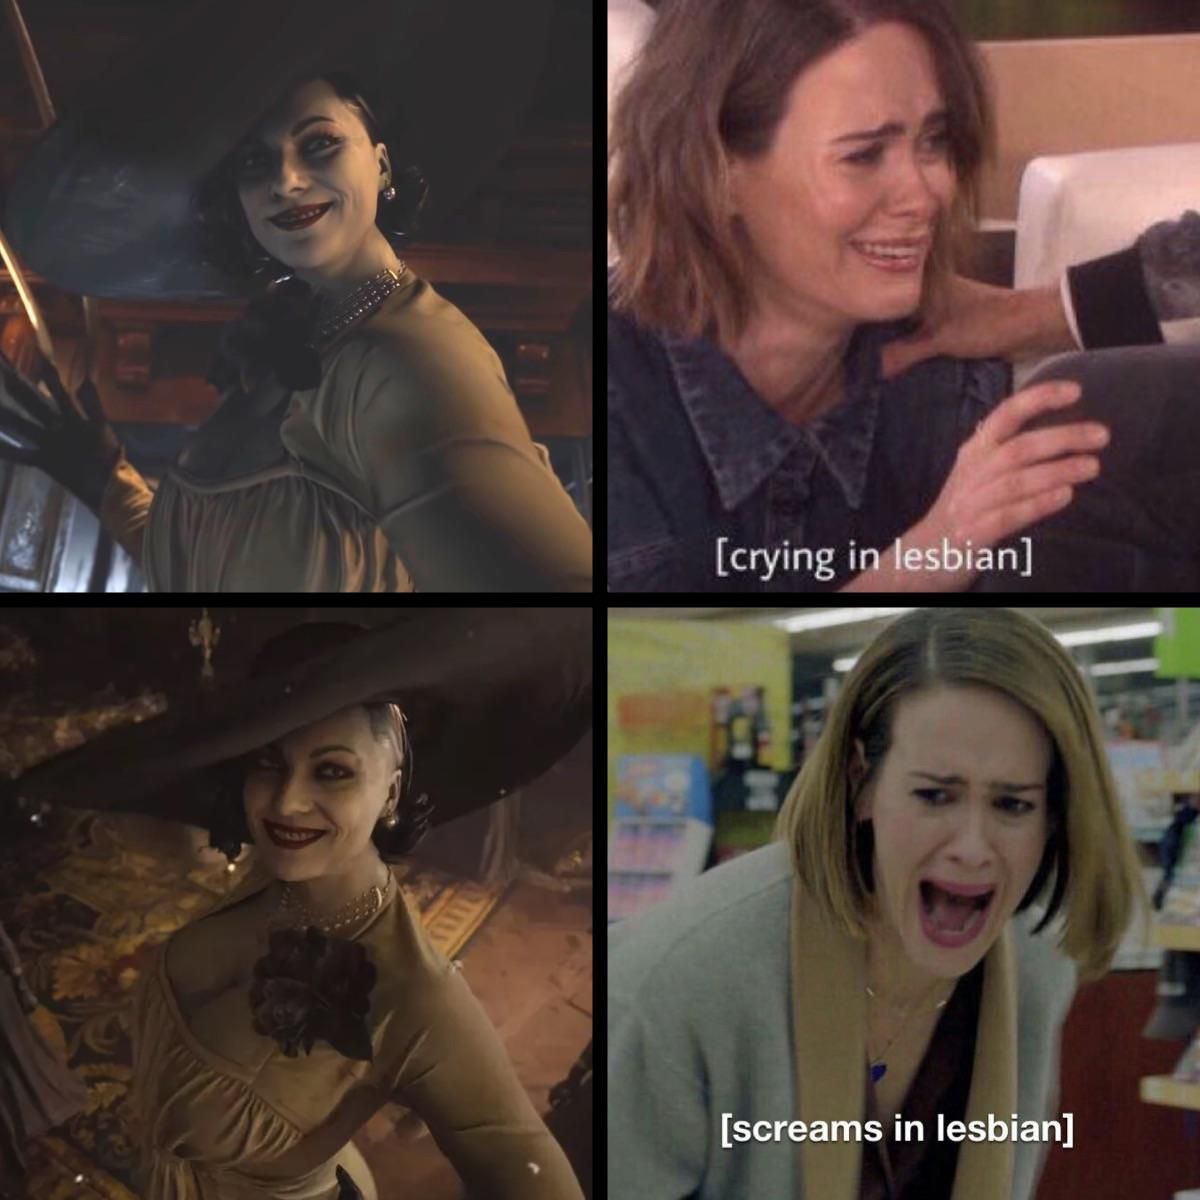 Pictures of Lady Dimitrescu with pictures of actress screaming with the subtitle "lesbian screaming."